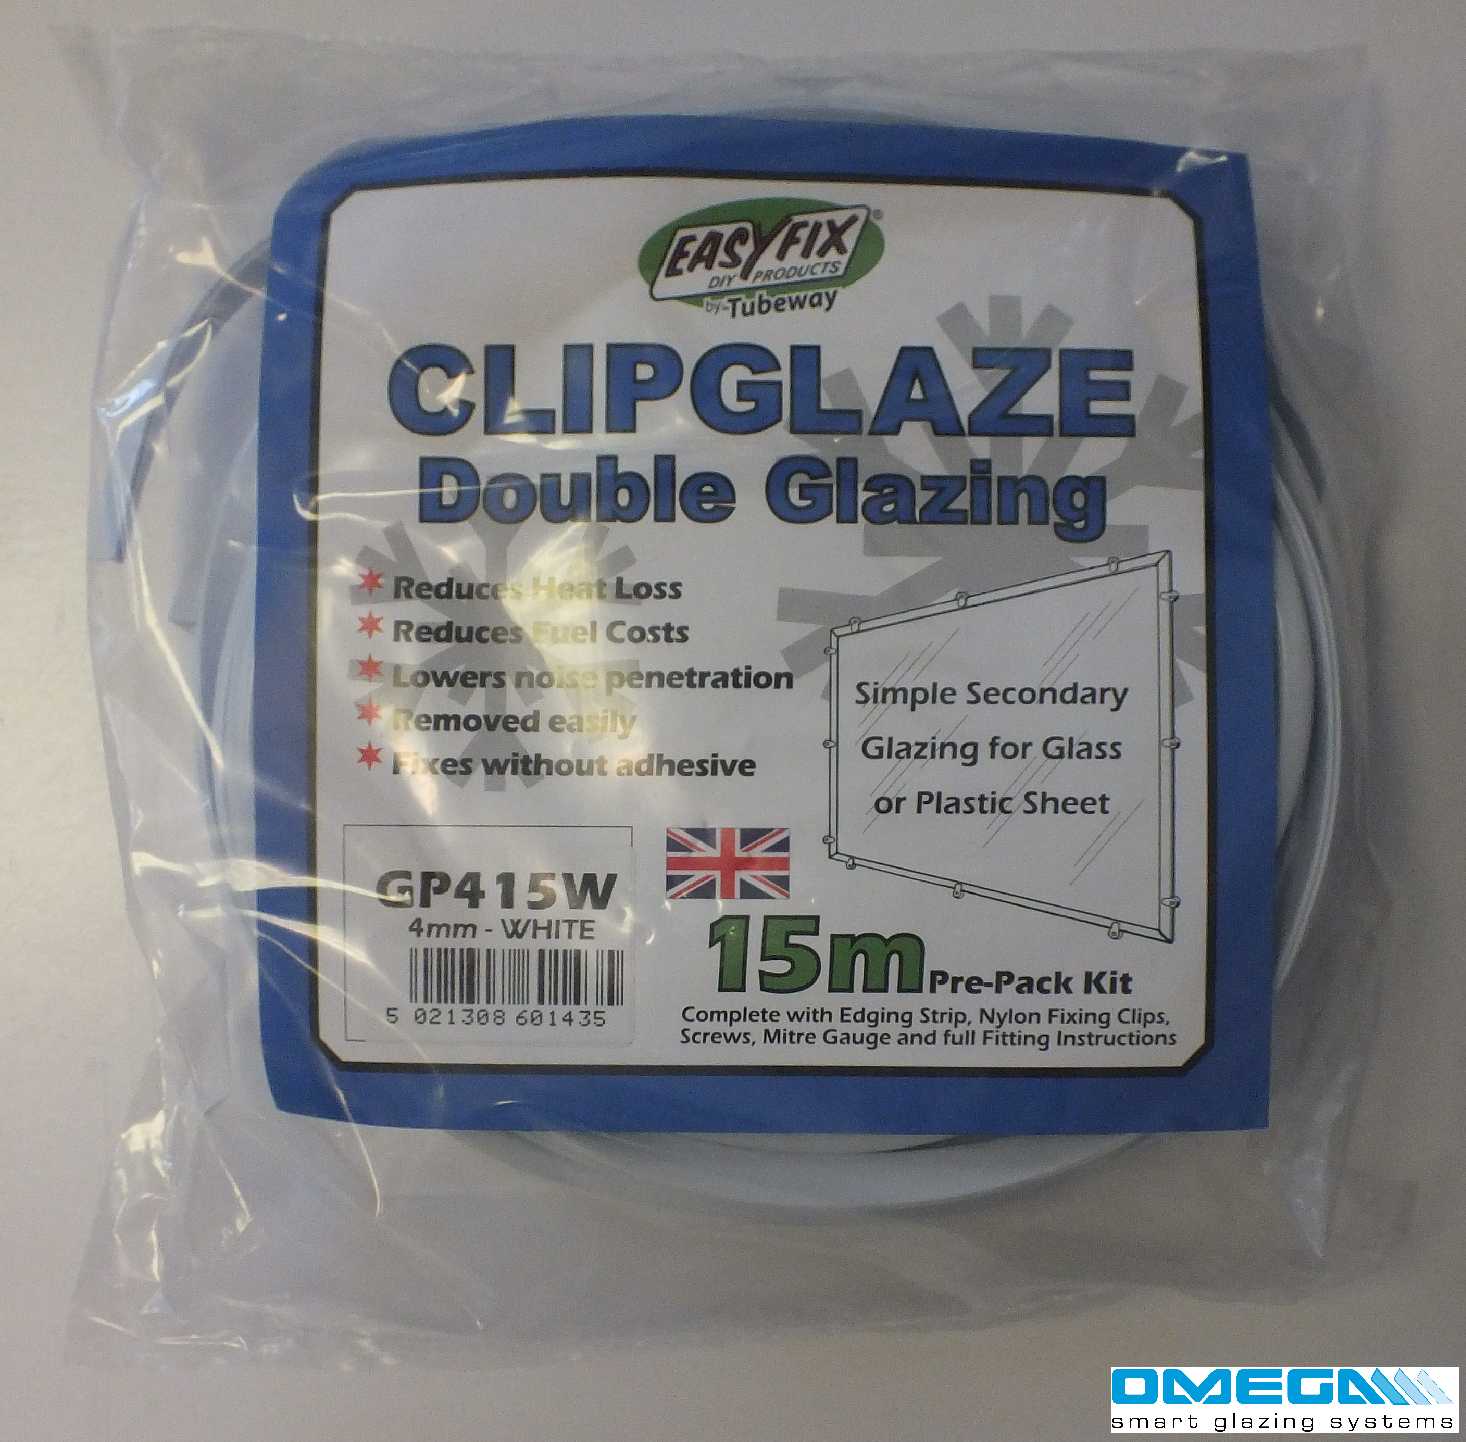 Easyfix Clipglaze Edging Kit - 15m roll of edging for 6mm Glazing Thickness, White or Clear from Omega Build